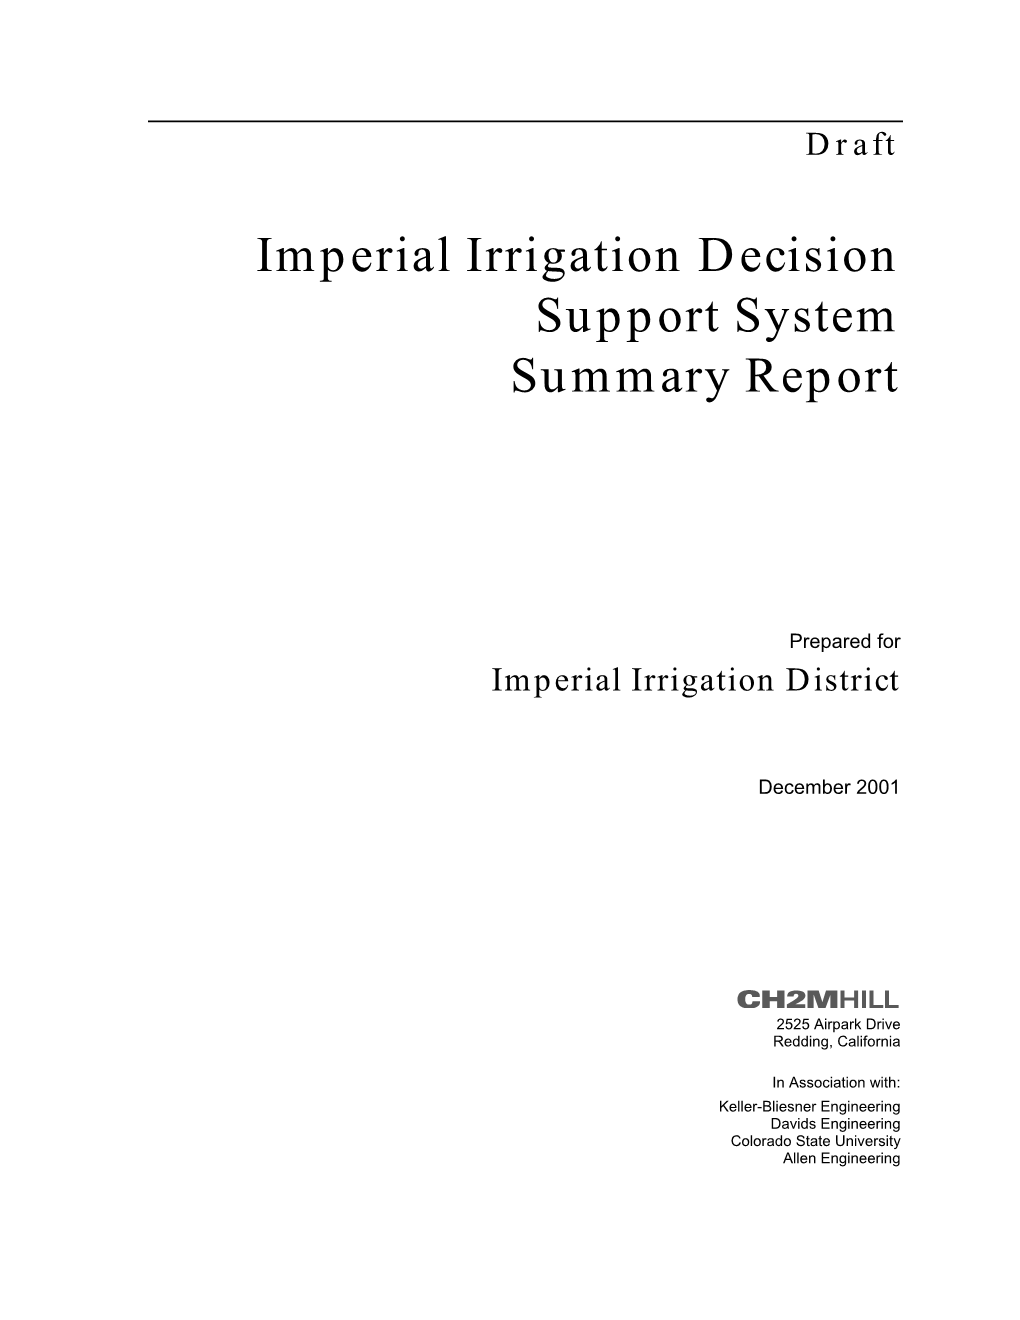 Imperial Irrigation Decision Support System Summary Report